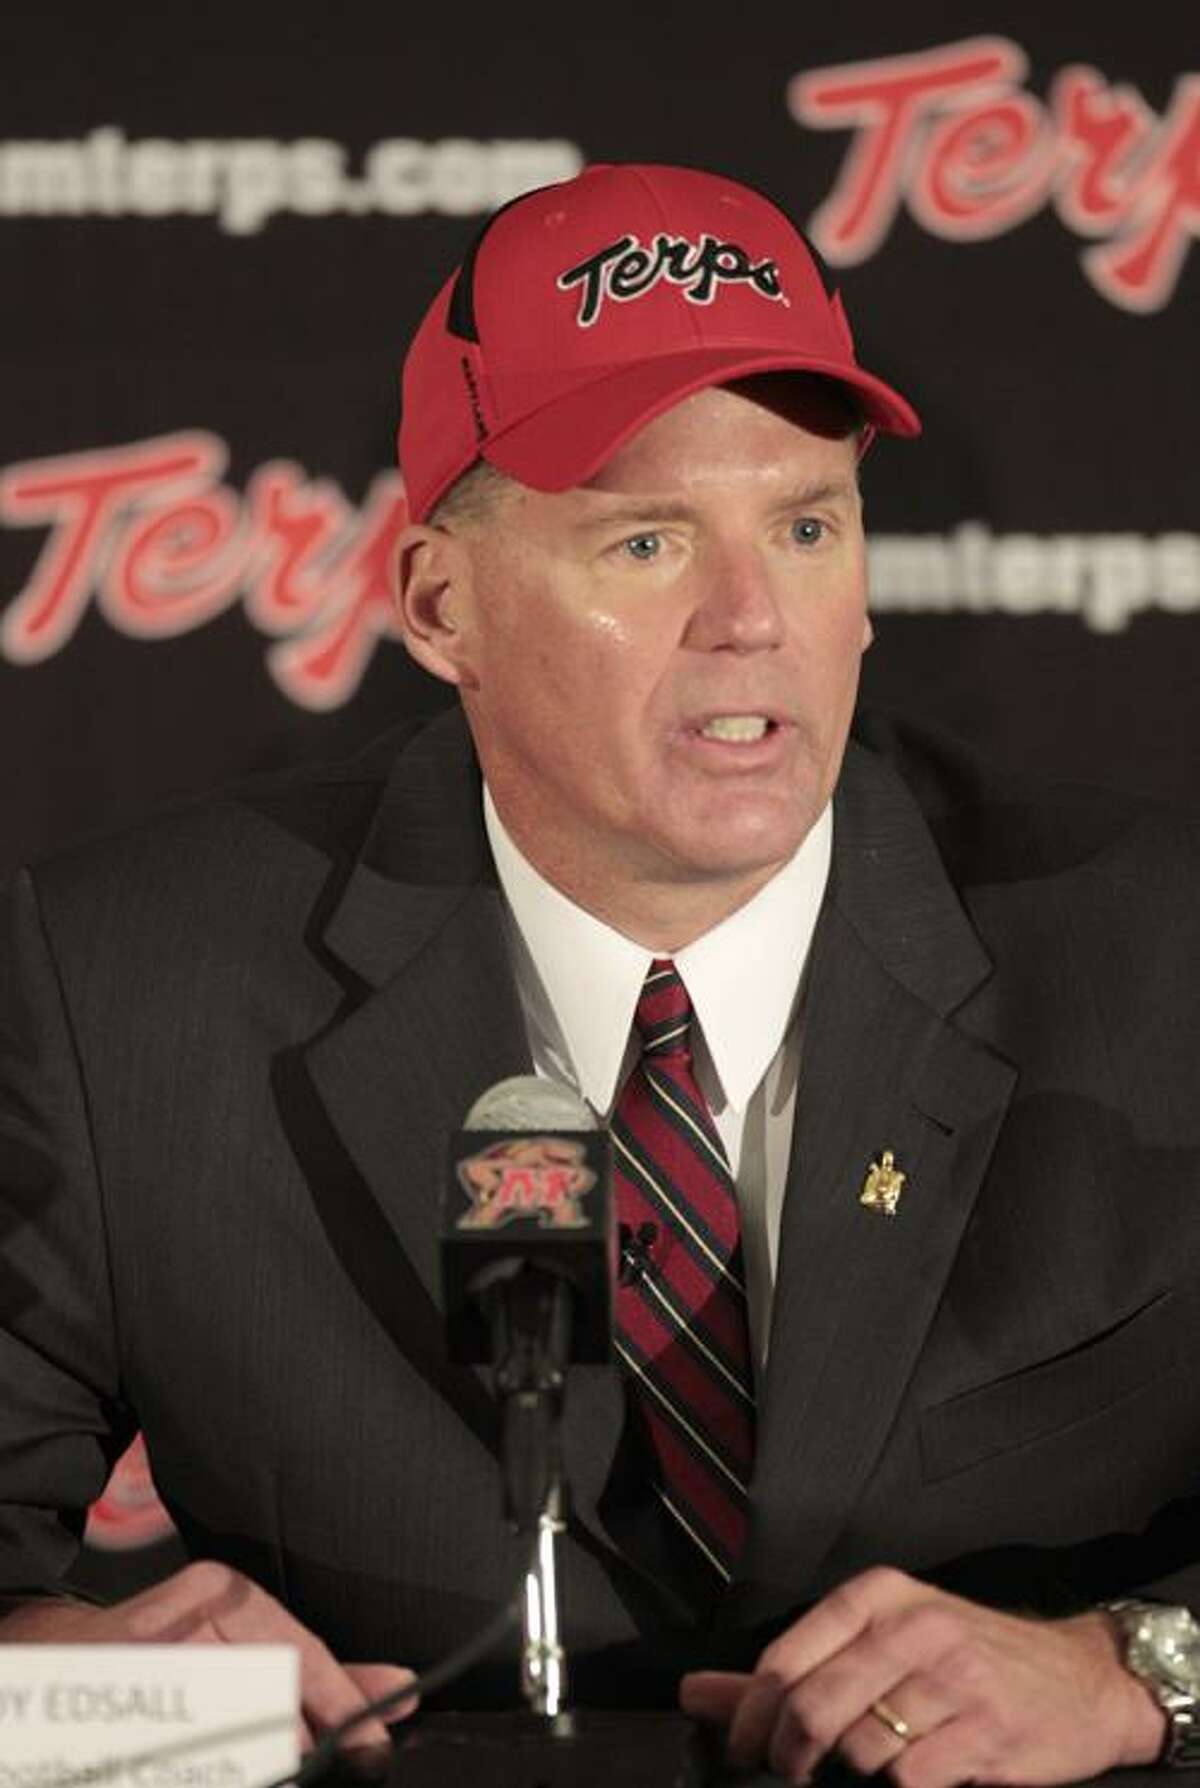 Randy Edsall speaks at a news conference after being introduced as the new head football coach at the University of Maryland, Monday, Jan. 3, 2011, in College Park, Md. (AP Photo/Rob Carr)